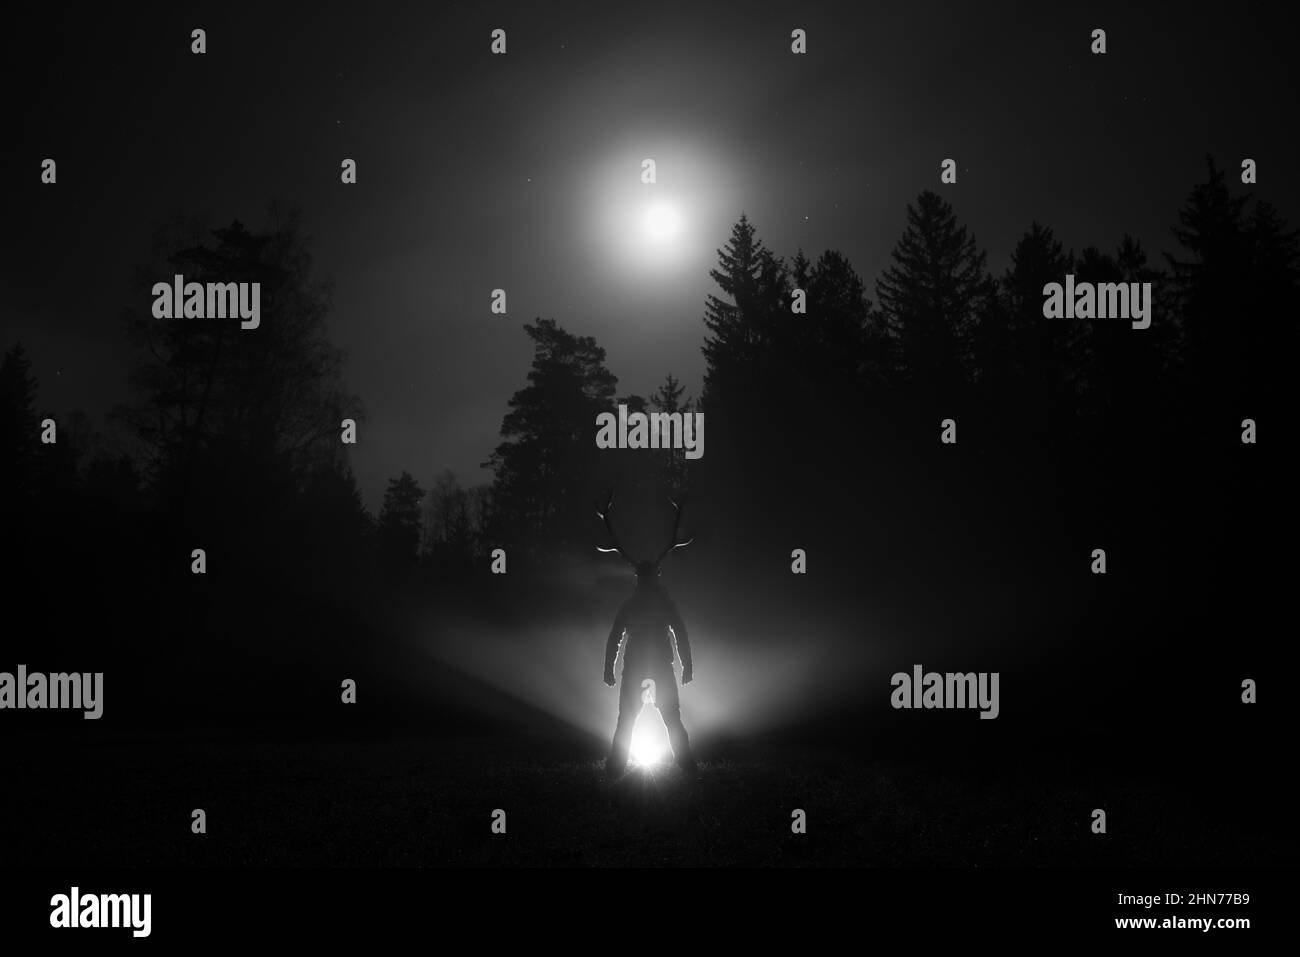 Person wearing a scary costume posing in a forest in grayscale Stock Photo